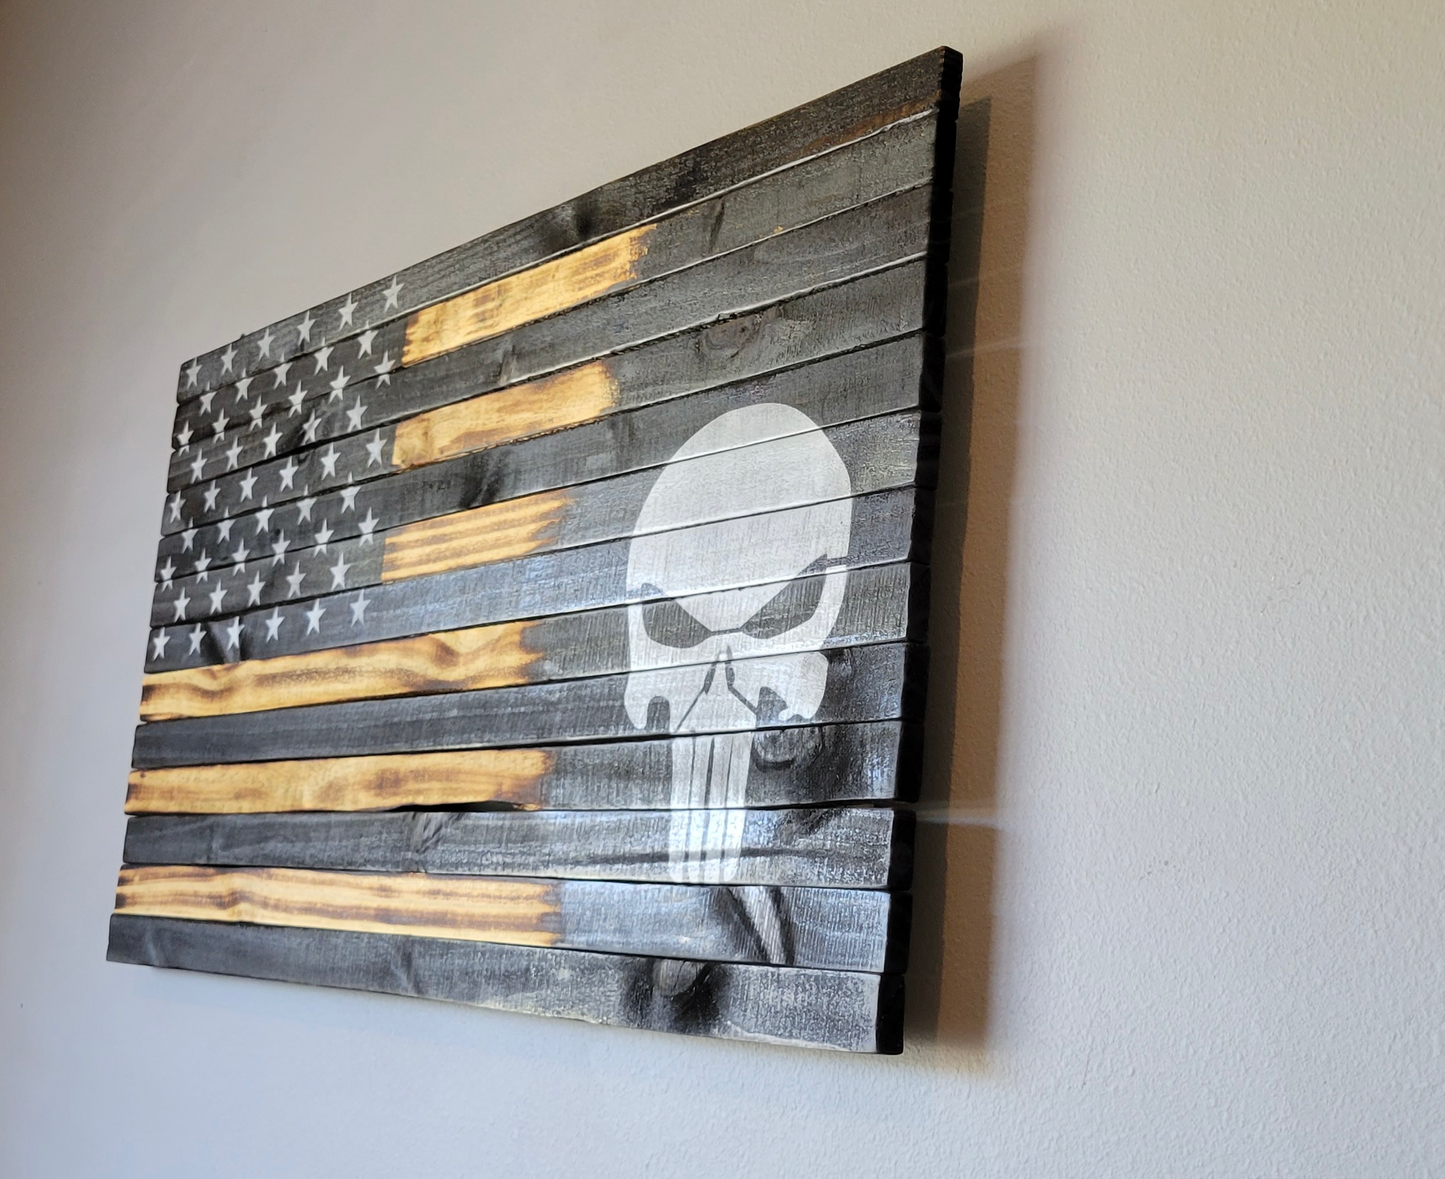 Punisher Wooden American Flag